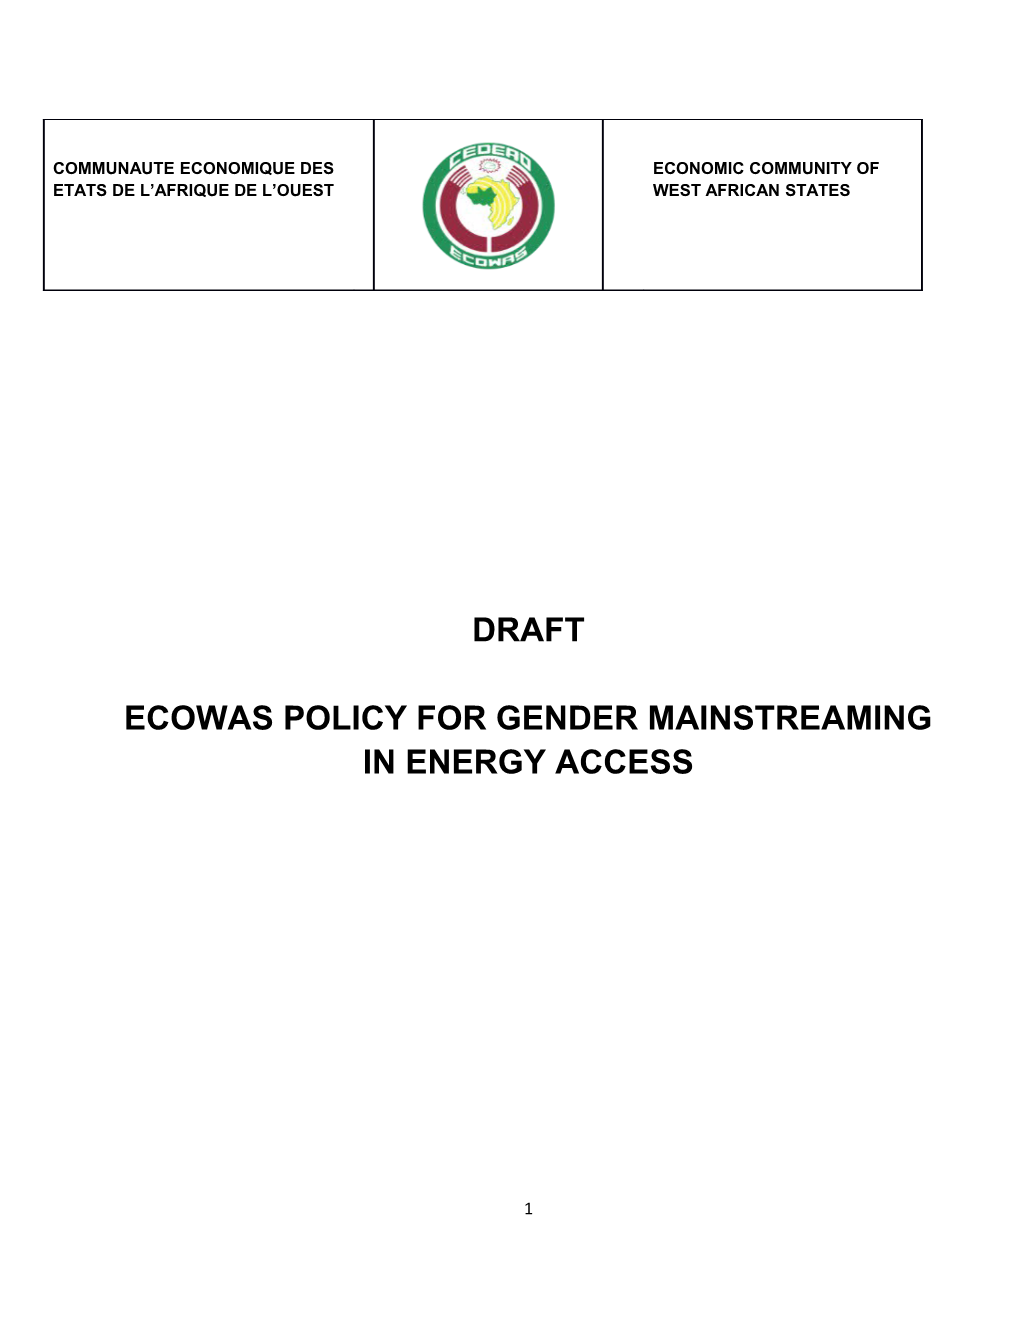 Ecowas Policy for Gender Mainstreaming in Energy Access